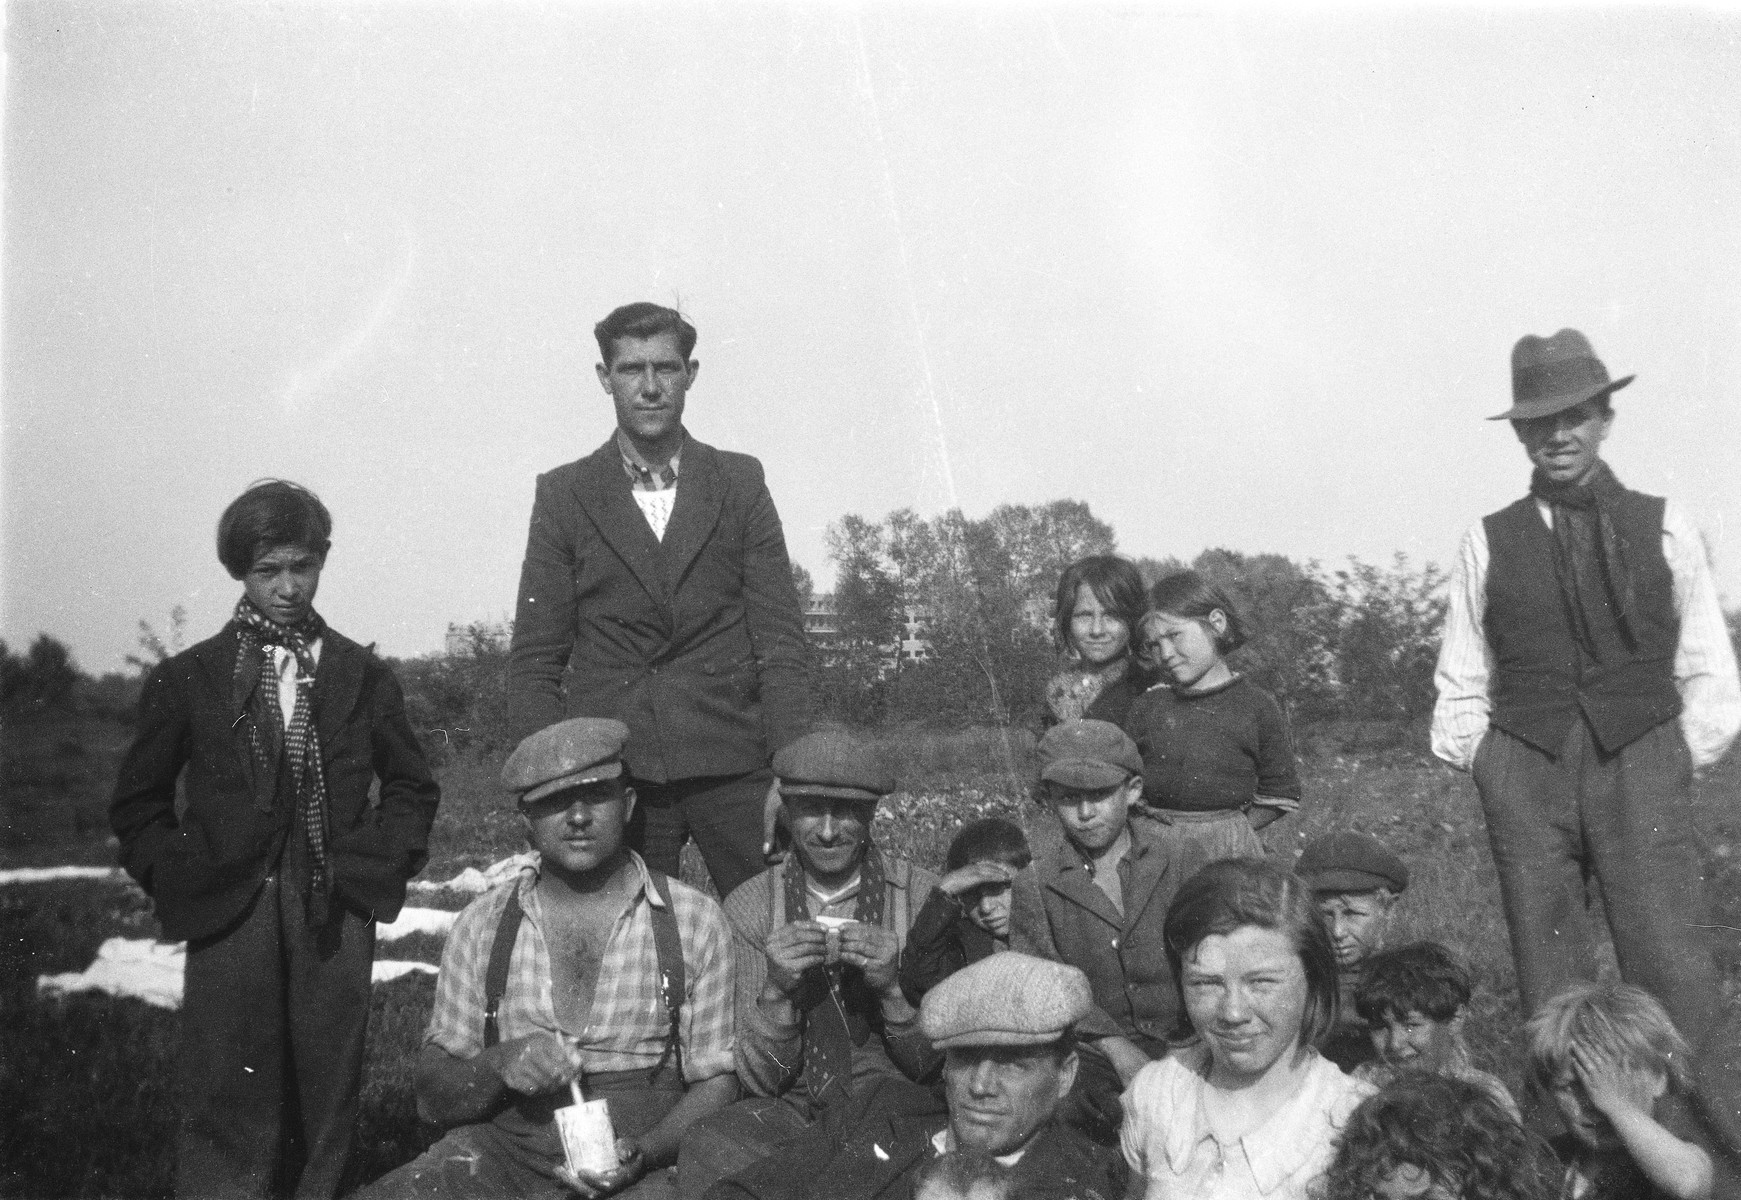 A Romani family poses for an outdoor photograph.